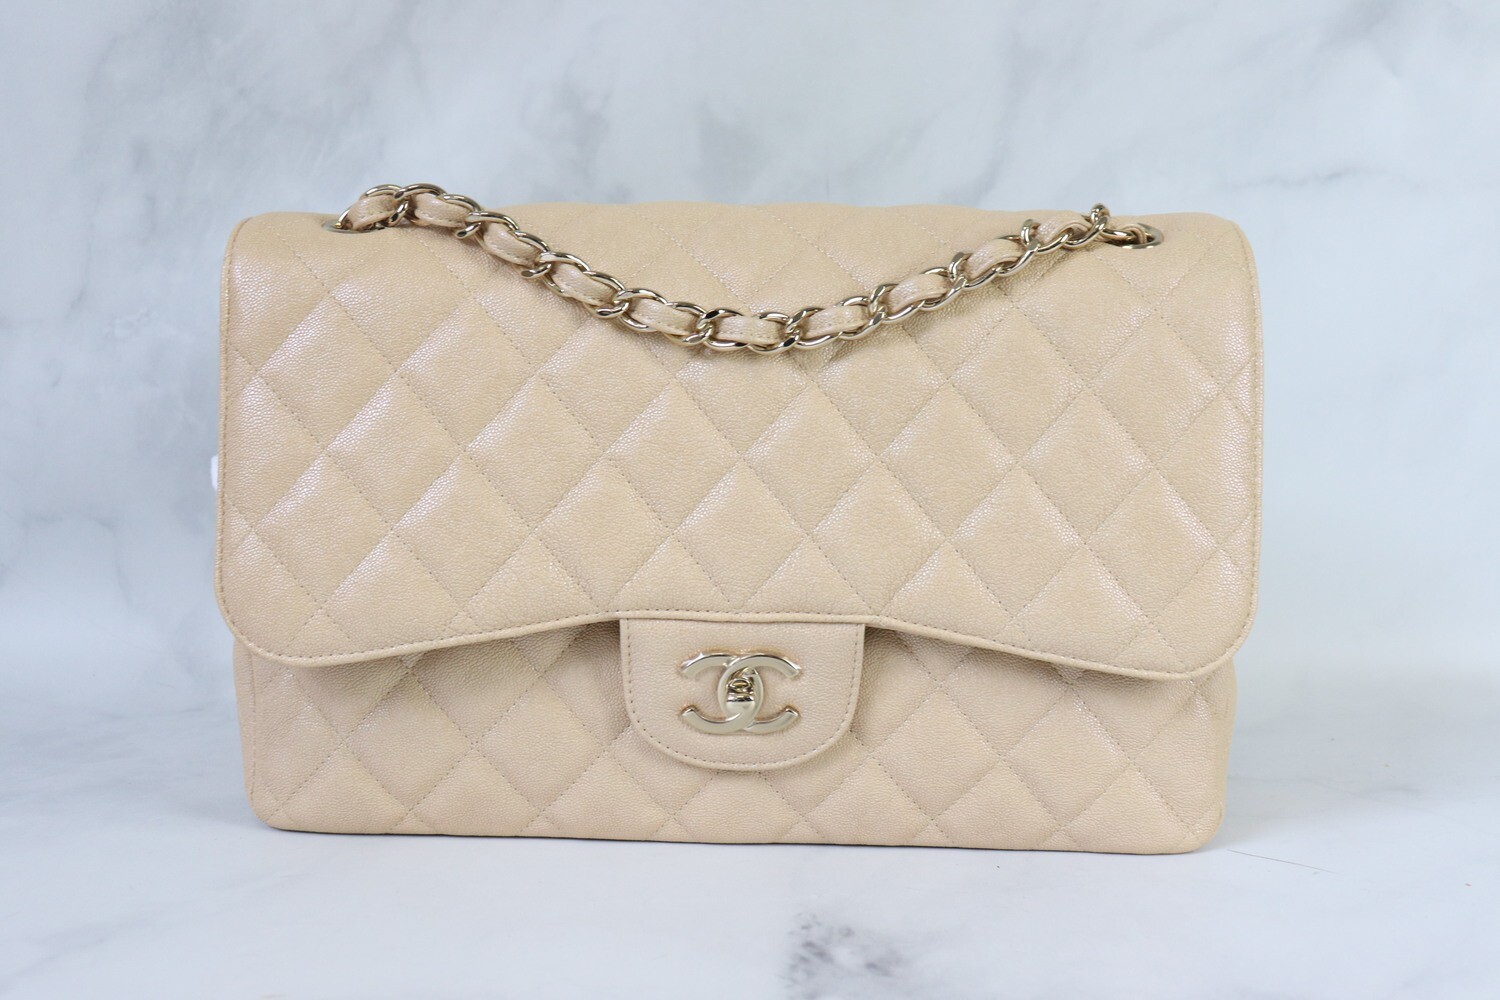 Chanel Classic Jumbo Double Flap, 19S Beige Iridescent Caviar Leather, Gold  Hardware, Preowned In Box (Mint Condition) - Julia Rose Boston